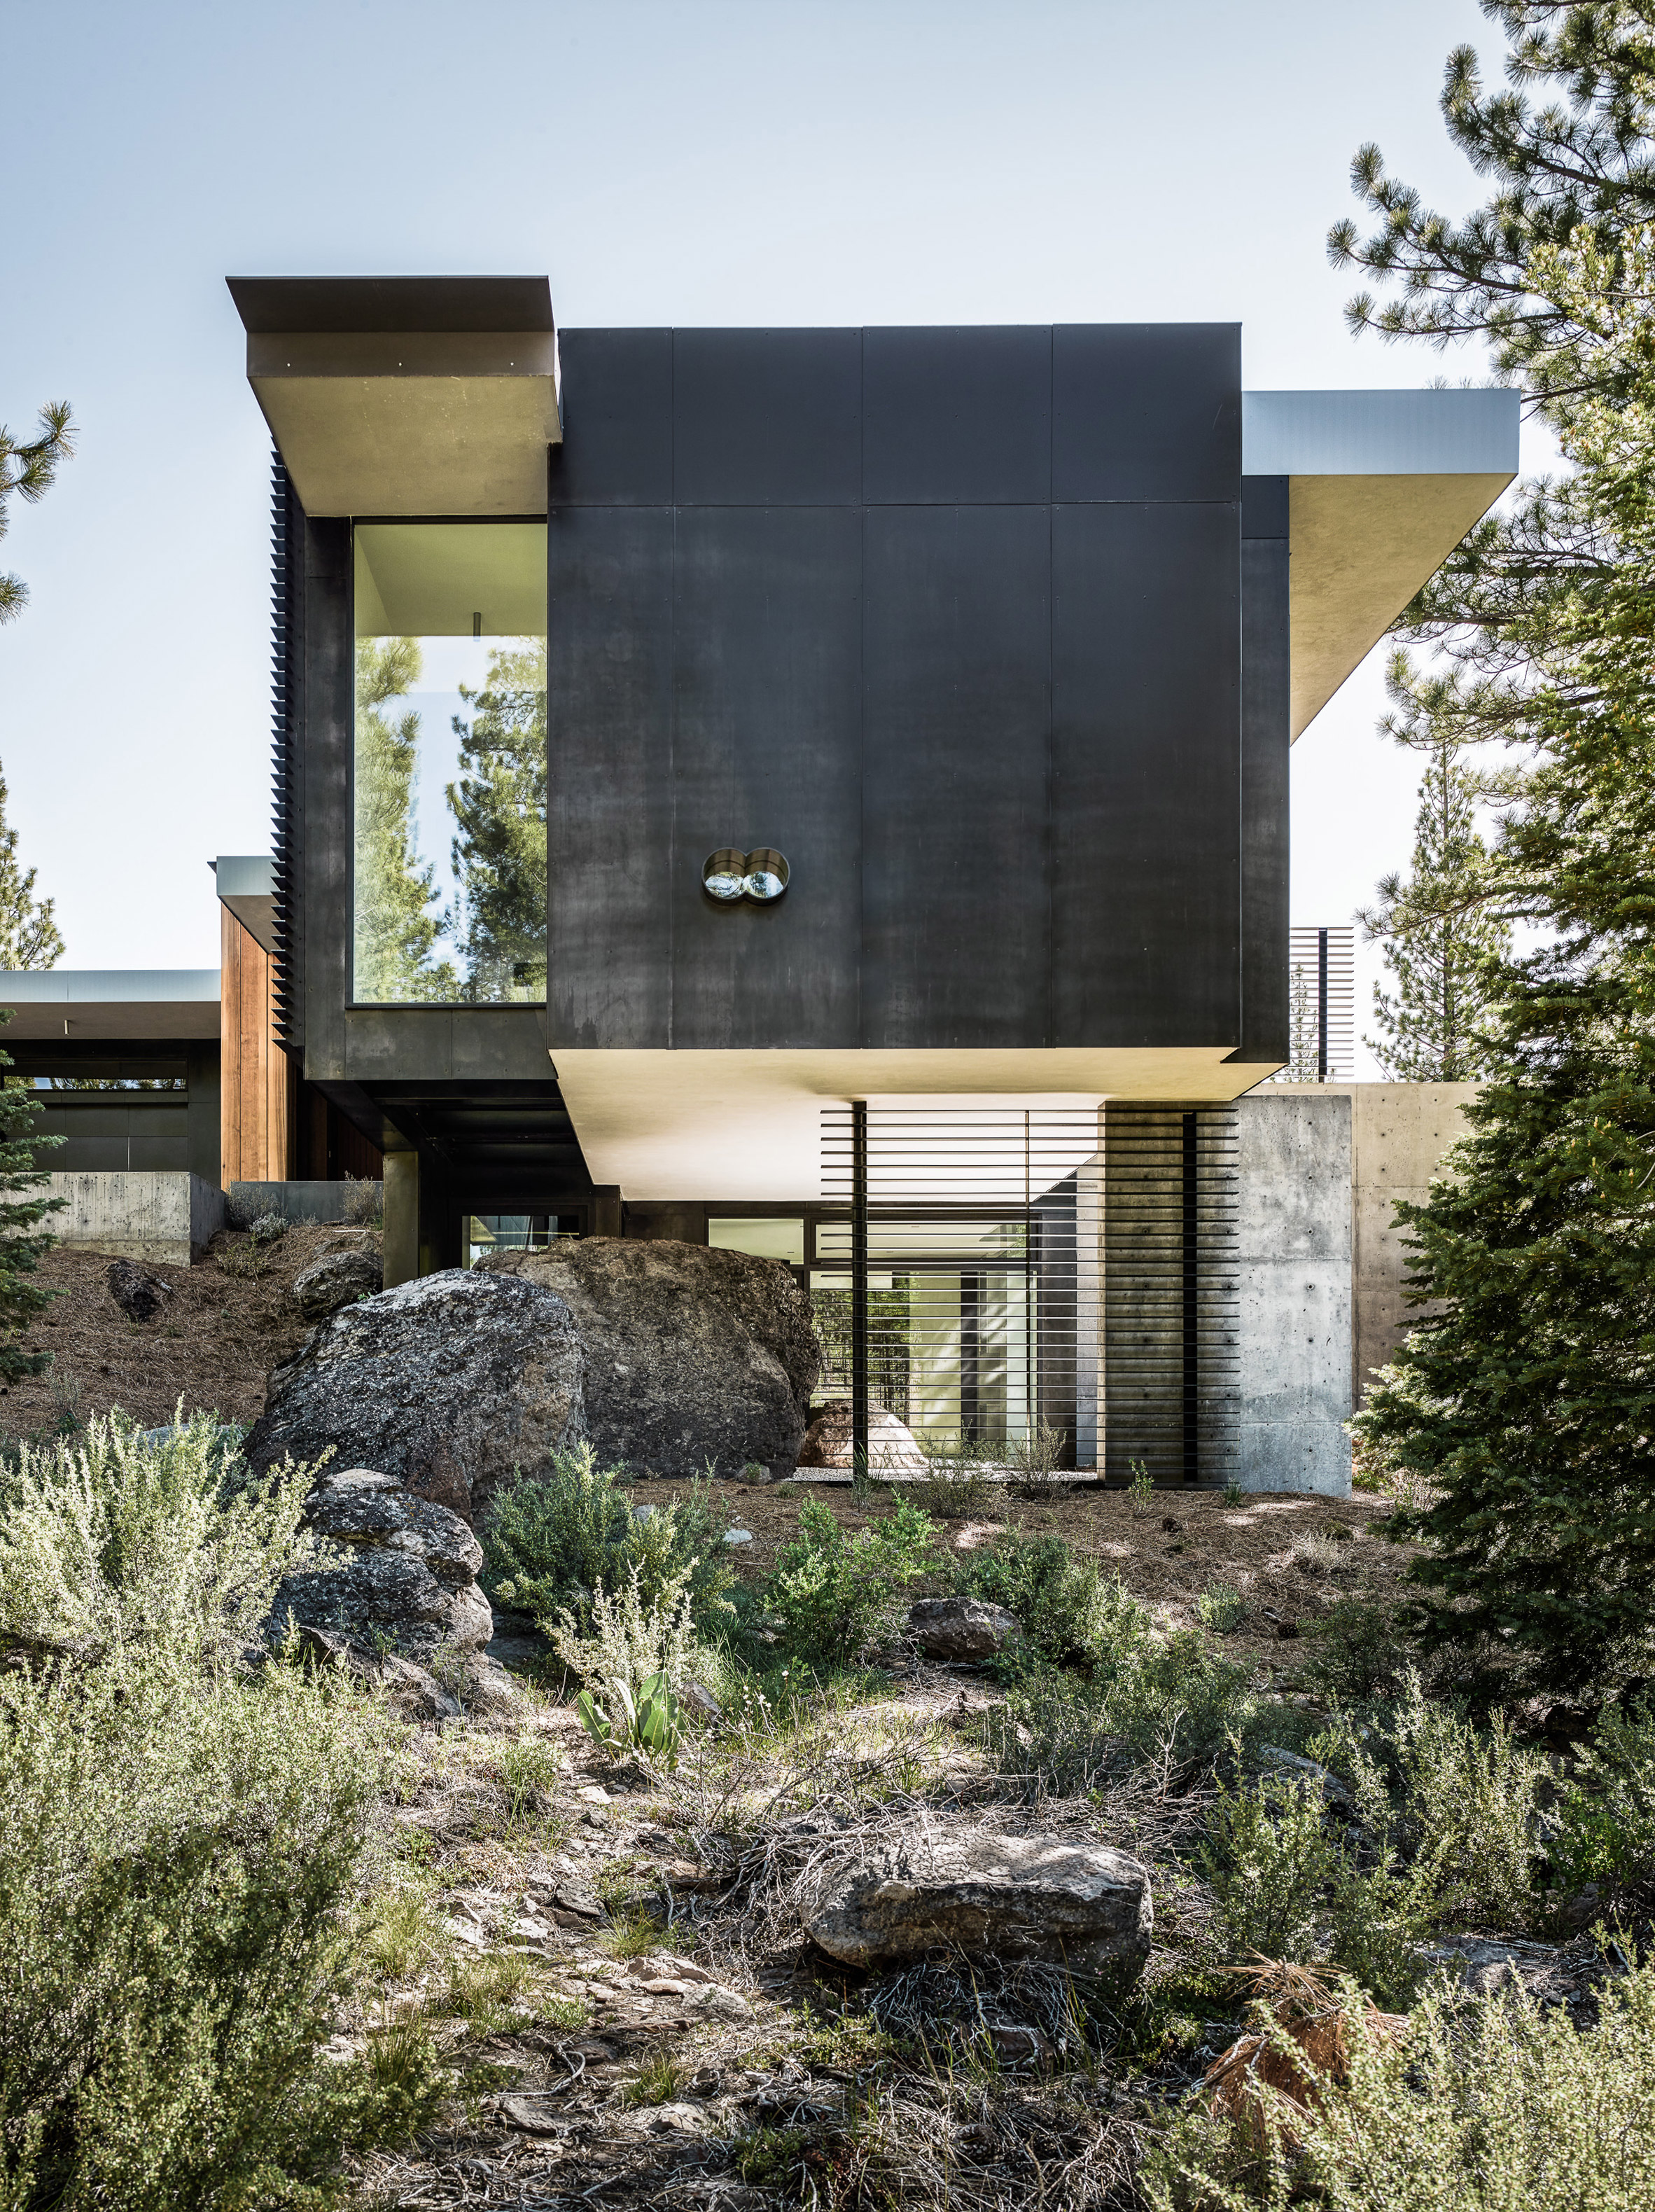 Creek House by Faulkner Architects preserves boulders on steep site in California